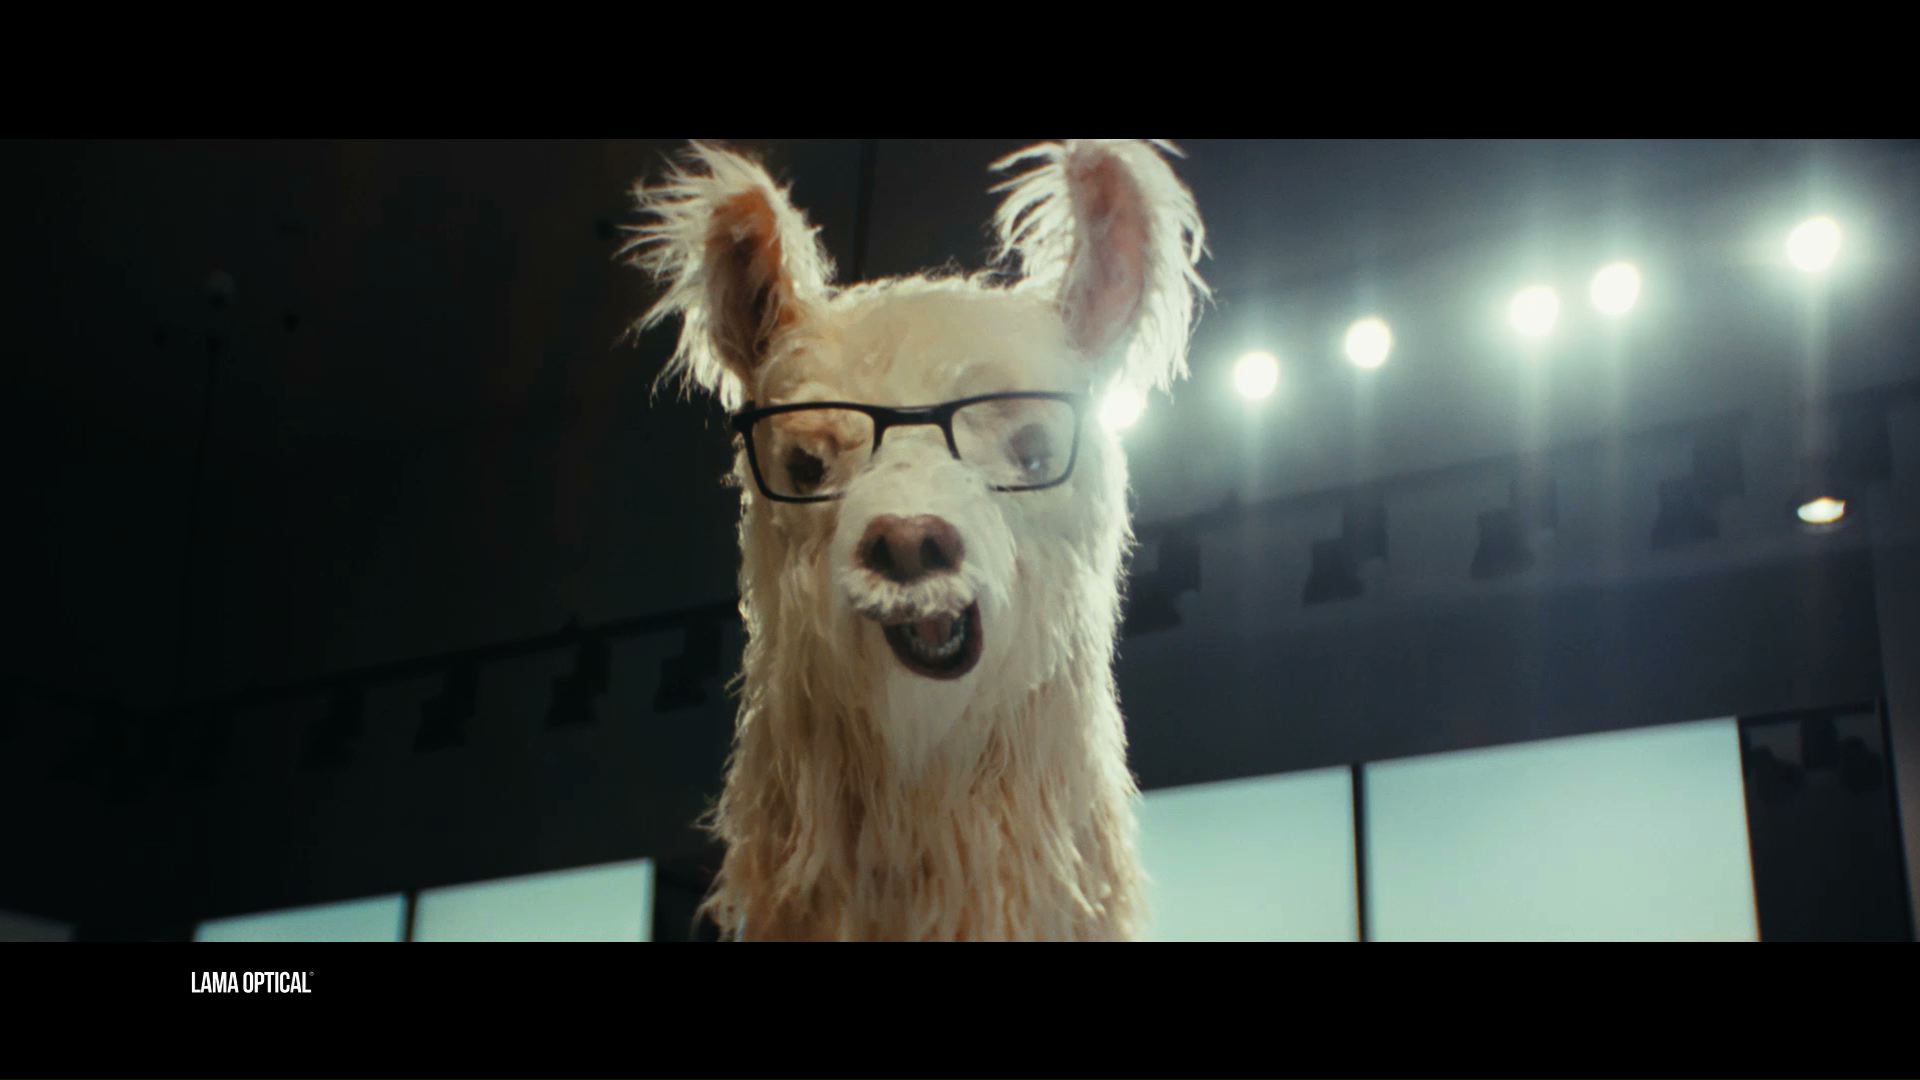 “No problama! There’s Lama!”:   Lama Optical’s new promotional campaign is by Armando Testa.